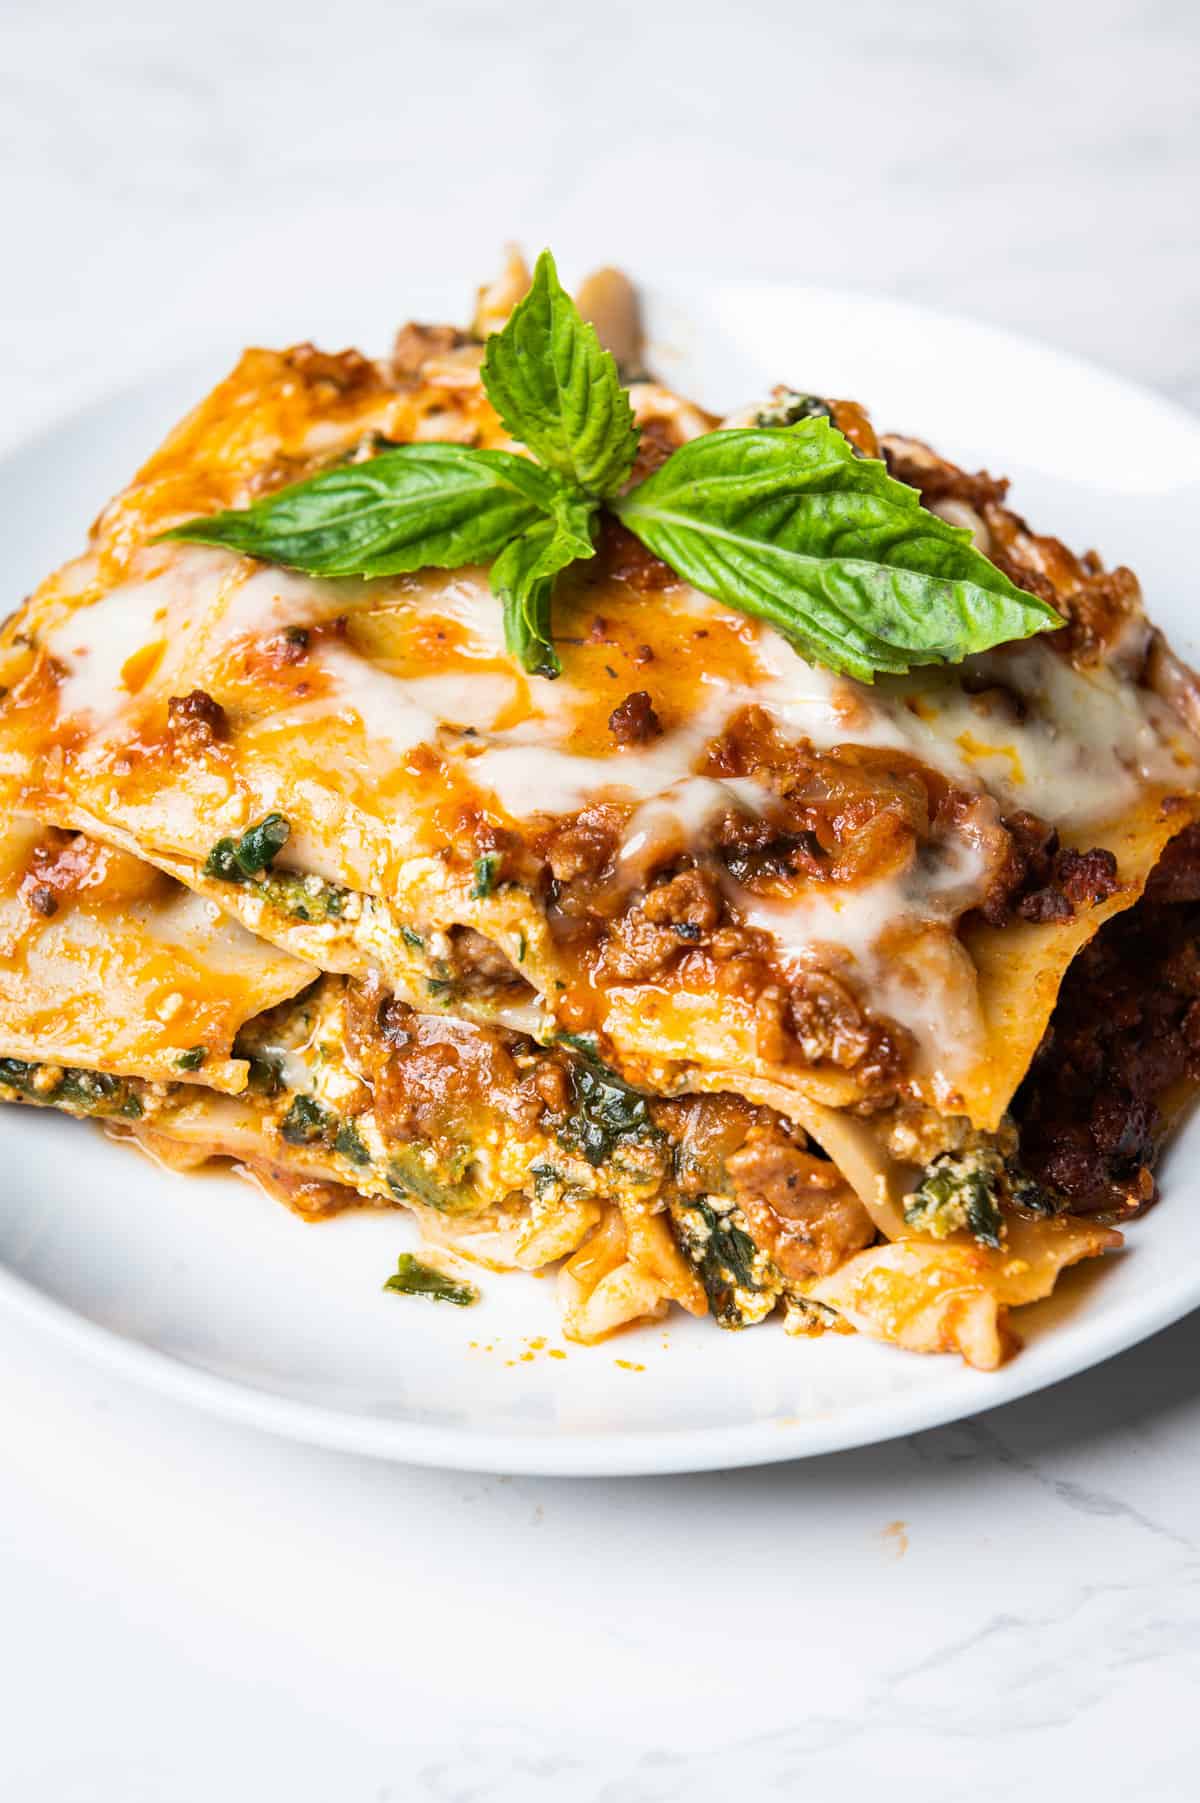 How To Make The Best Lasagna Homemade - G-Free Foodie